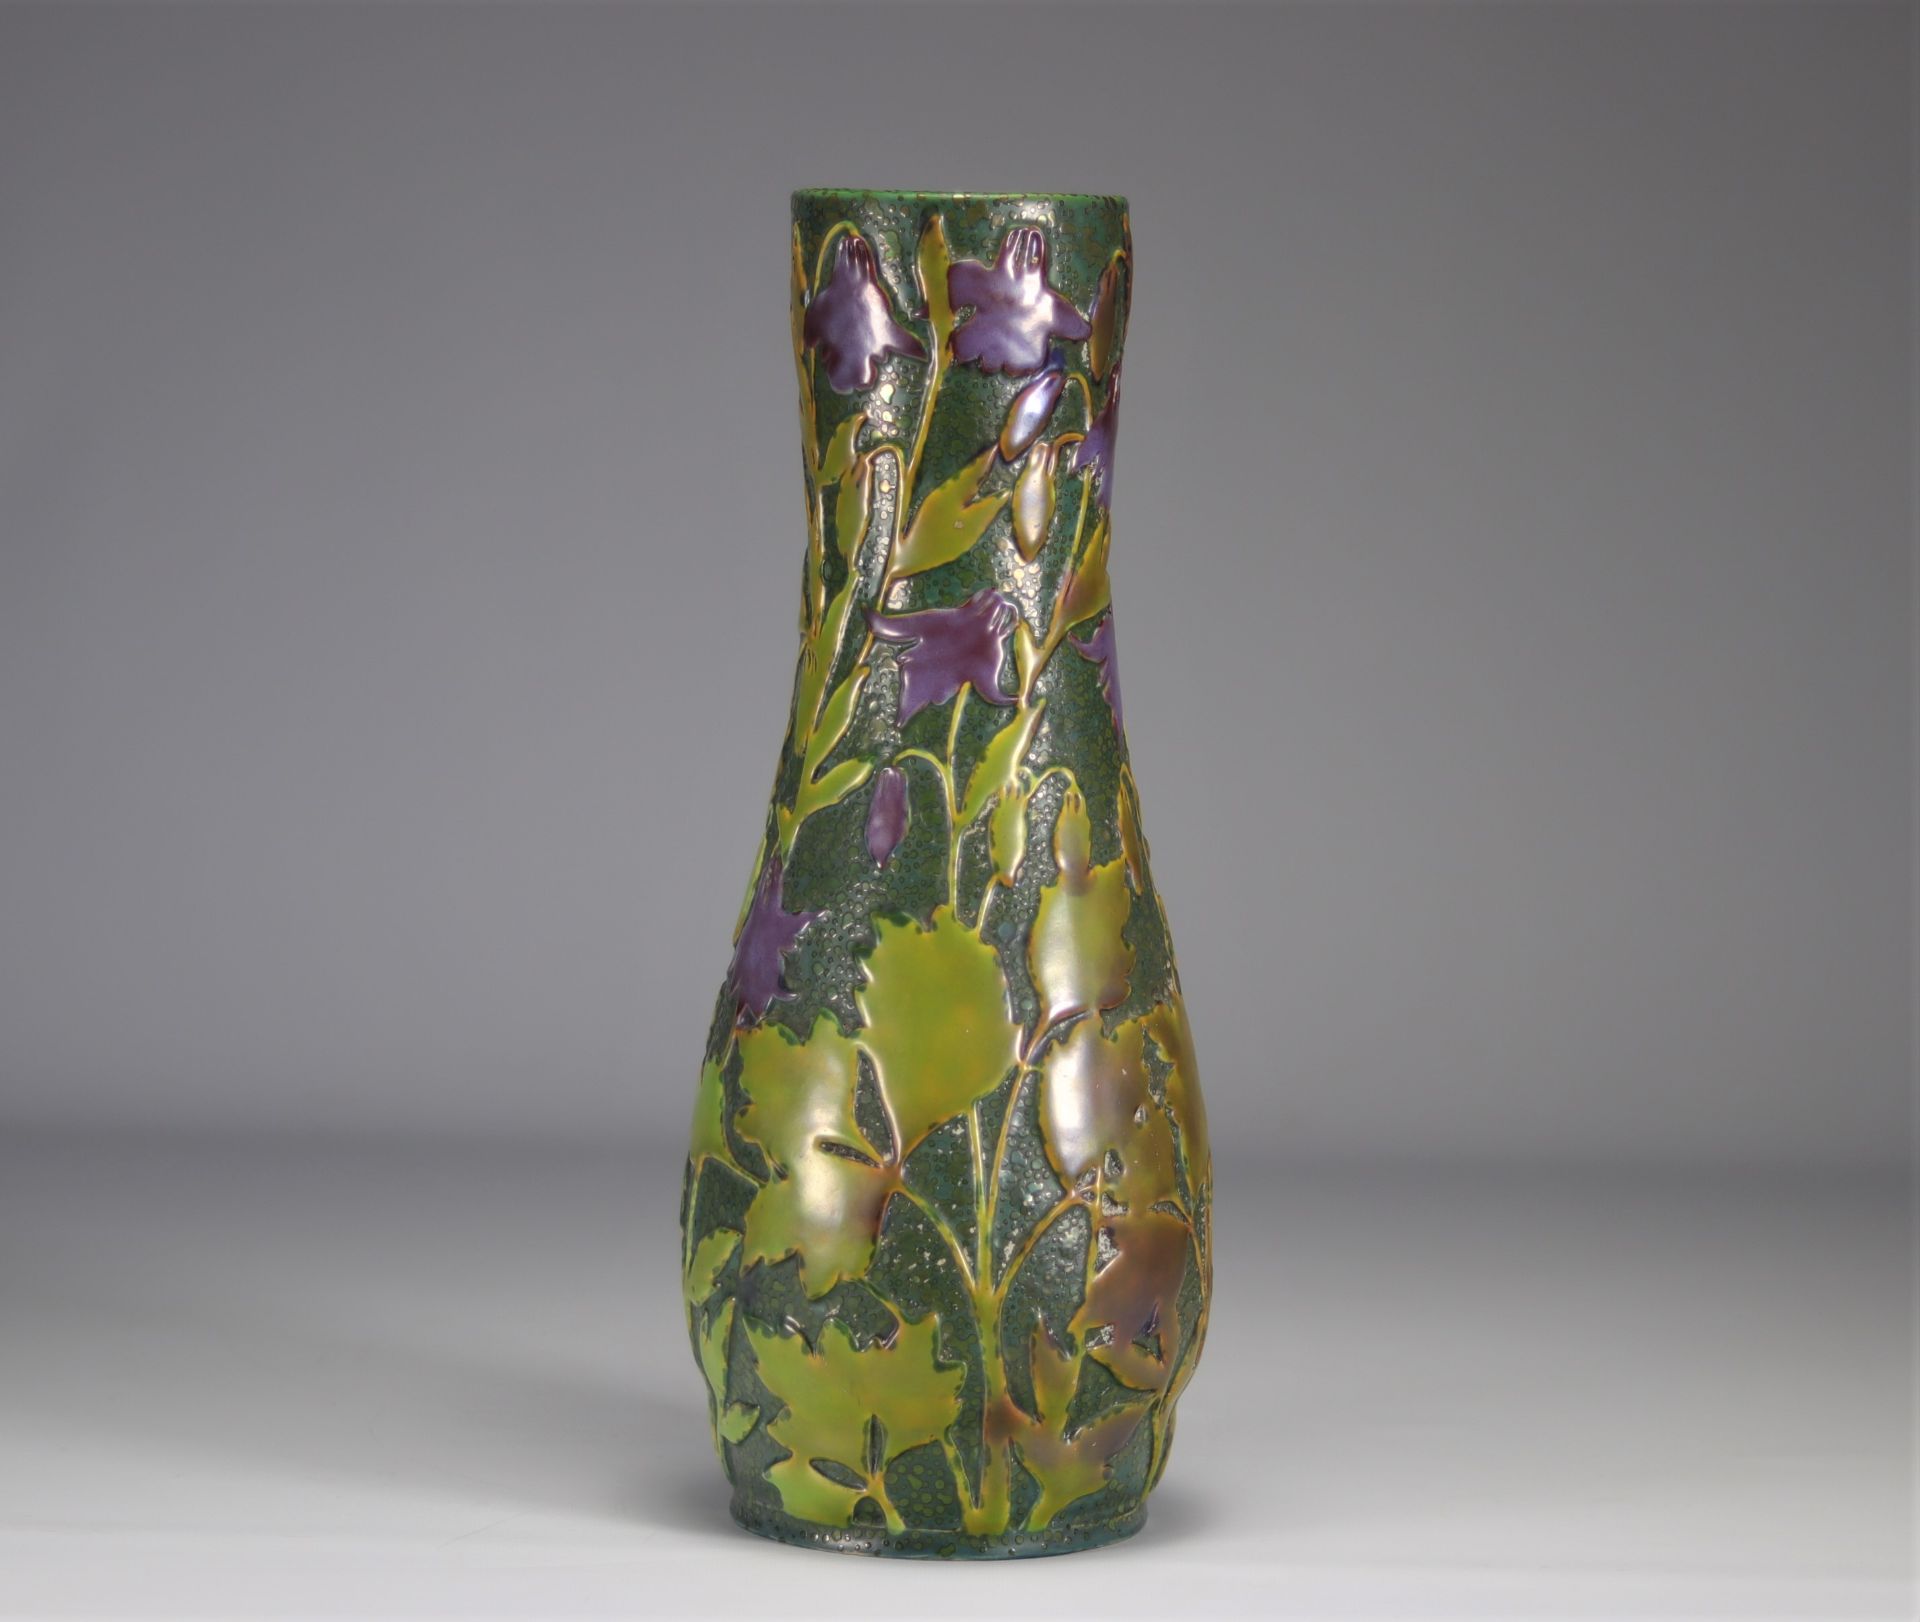 Vilmos ZSOLNAY (1840 - 1900) rare Art Nouveau vase decorated with purple flowers on a green backgrou - Image 2 of 6